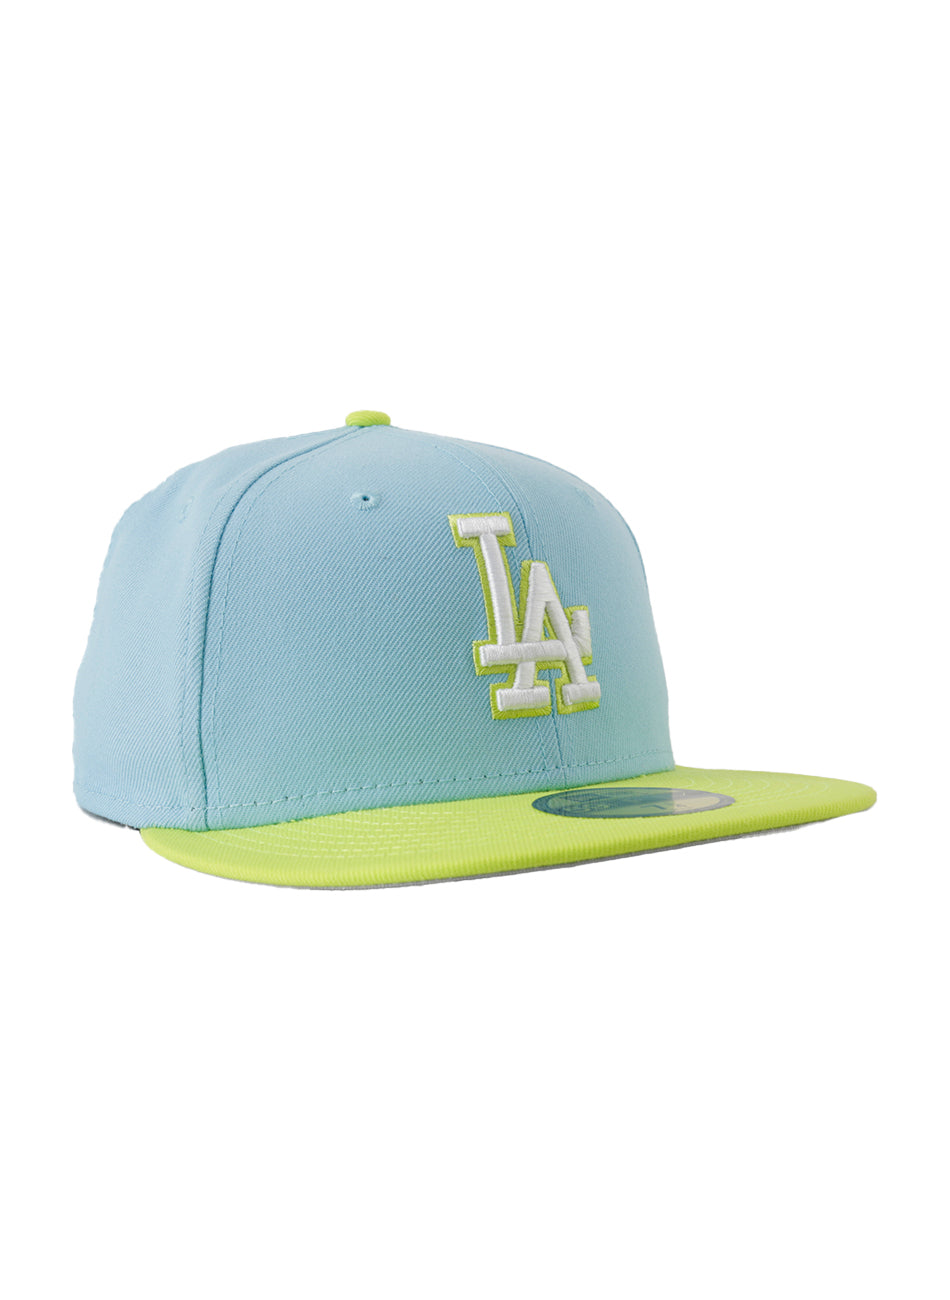 LA Dodgers Color Pack 5950 Fitted Cap - Cyber Green/Blue